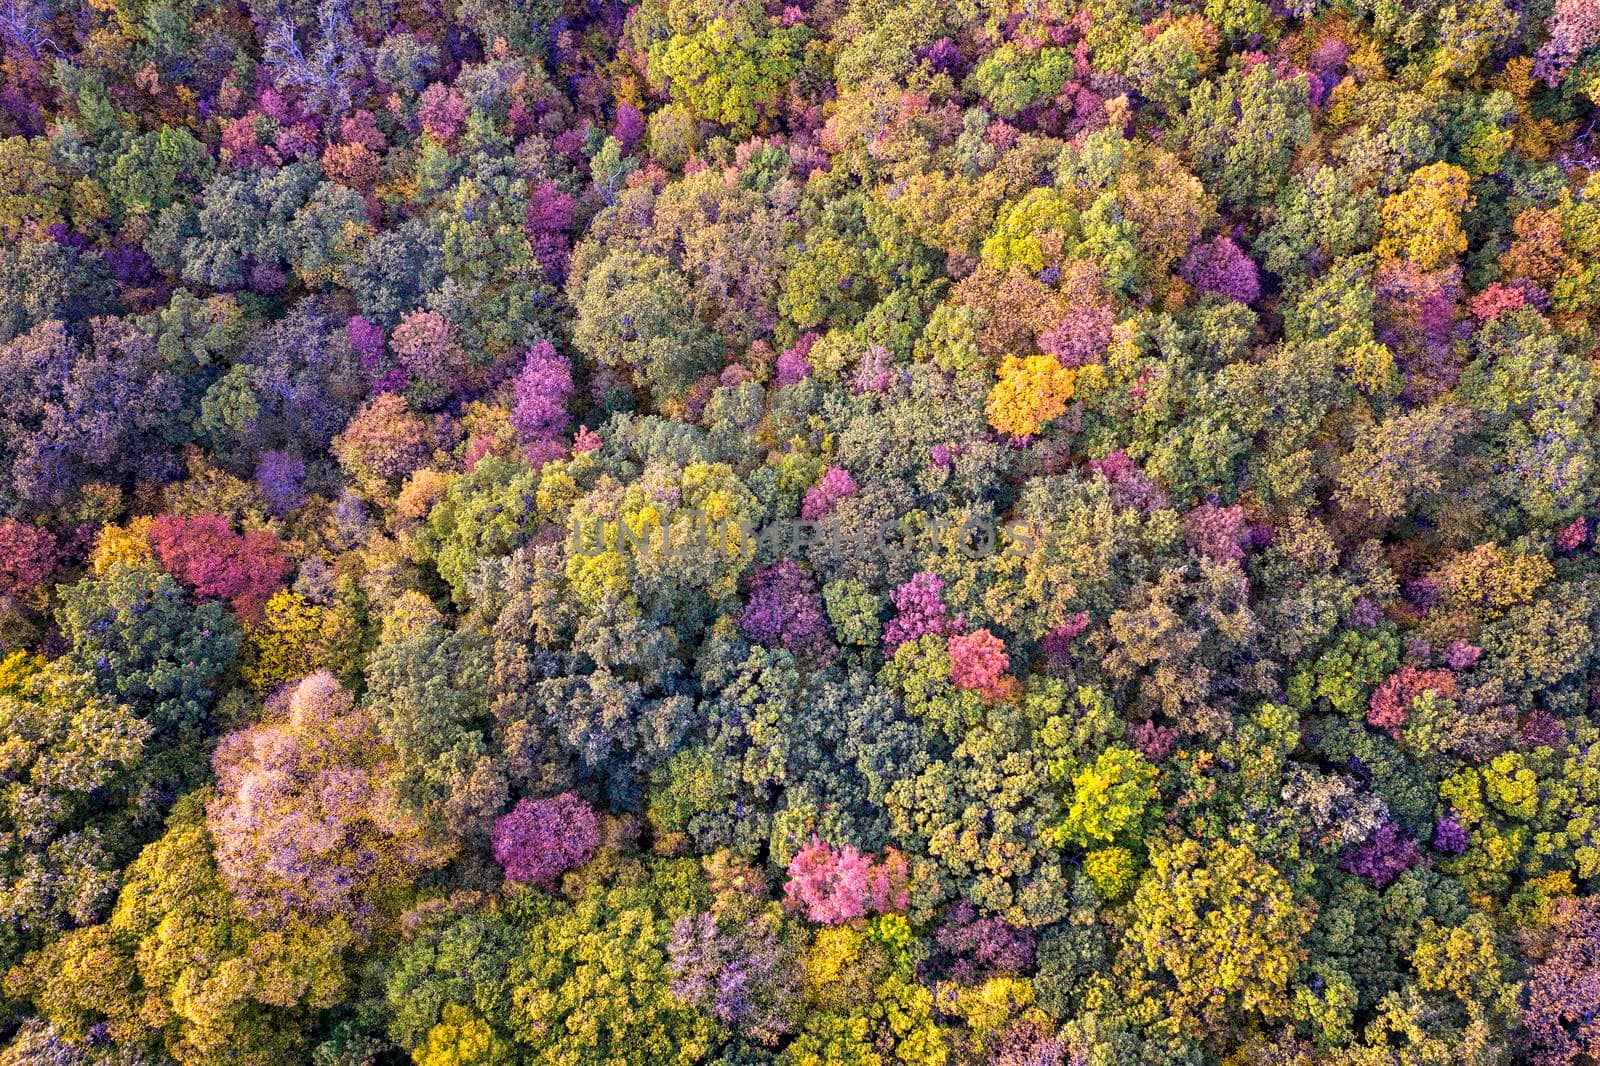 Autumn colorful forest. Aerial view from a drone over colorful autumn leaves in the forest. by EdVal